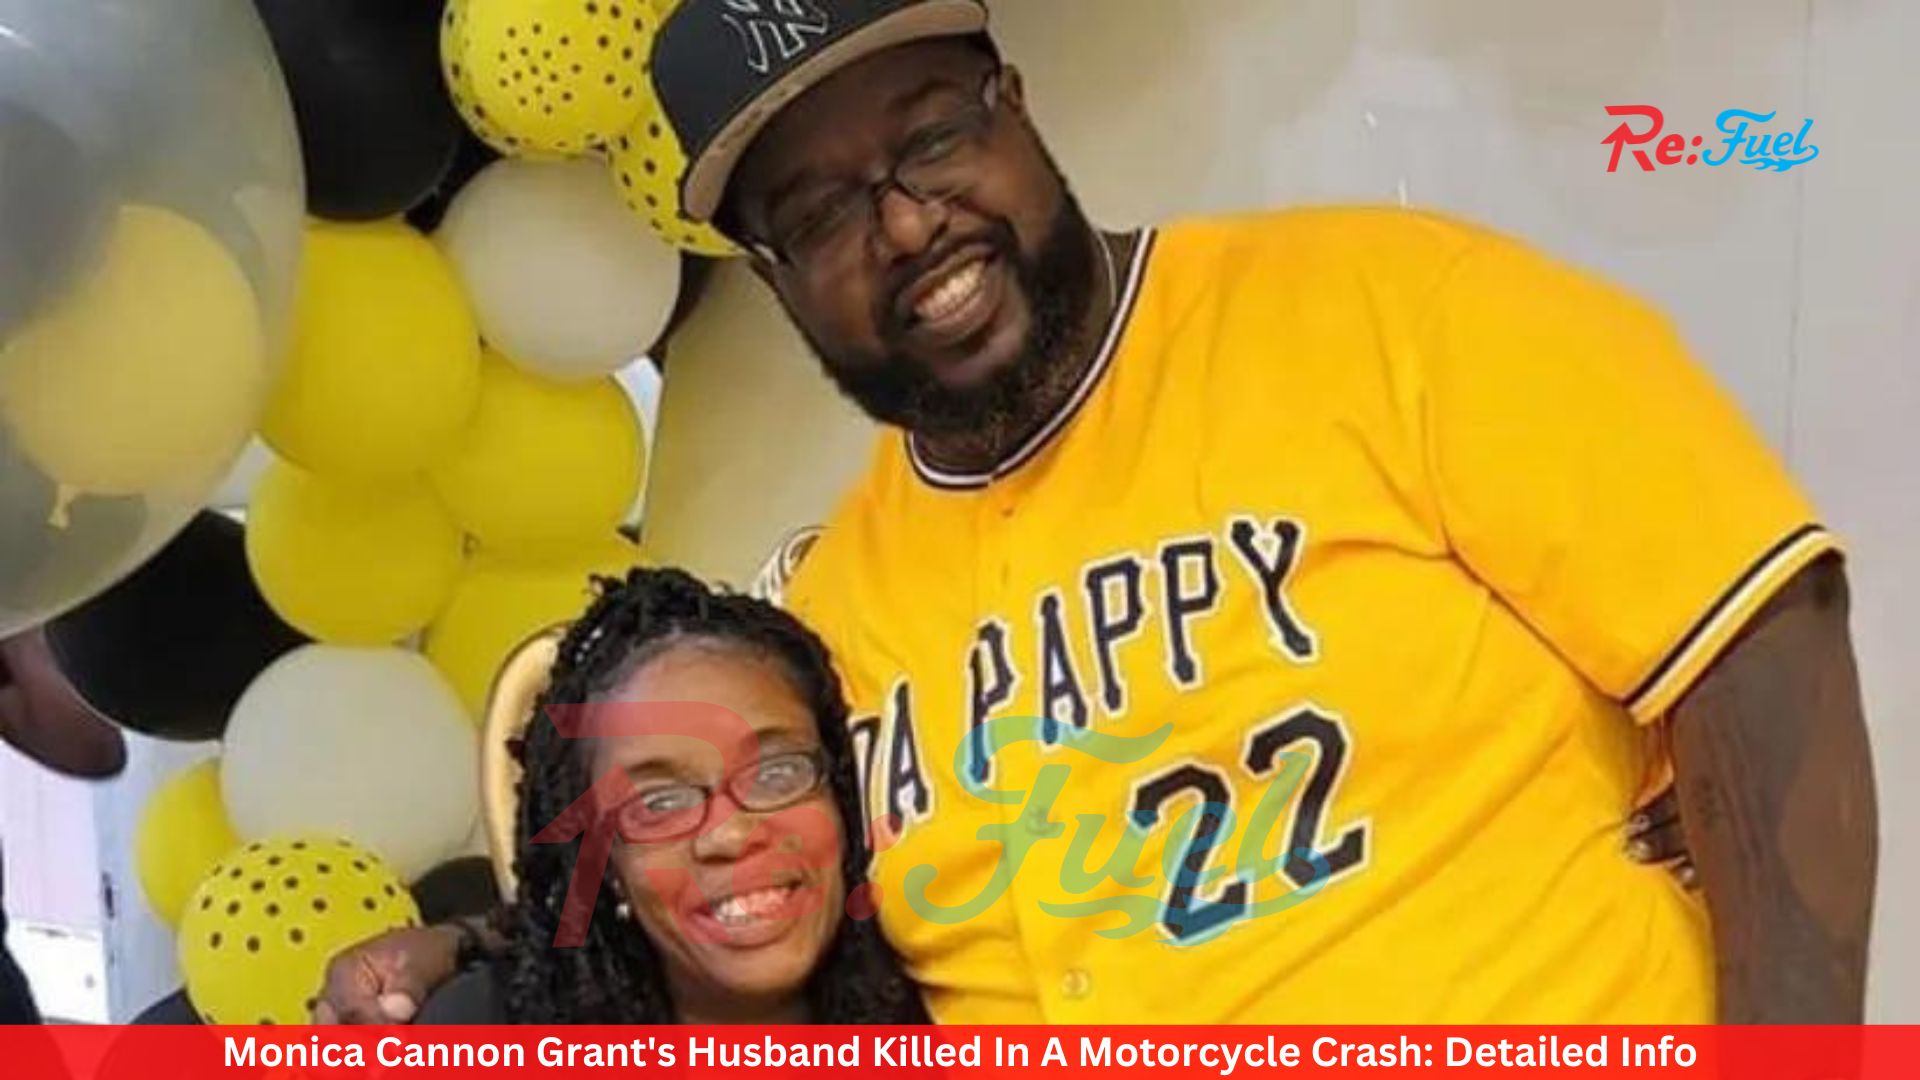 Monica Cannon Grant's Husband Killed In A Motorcycle Crash: Detailed Info